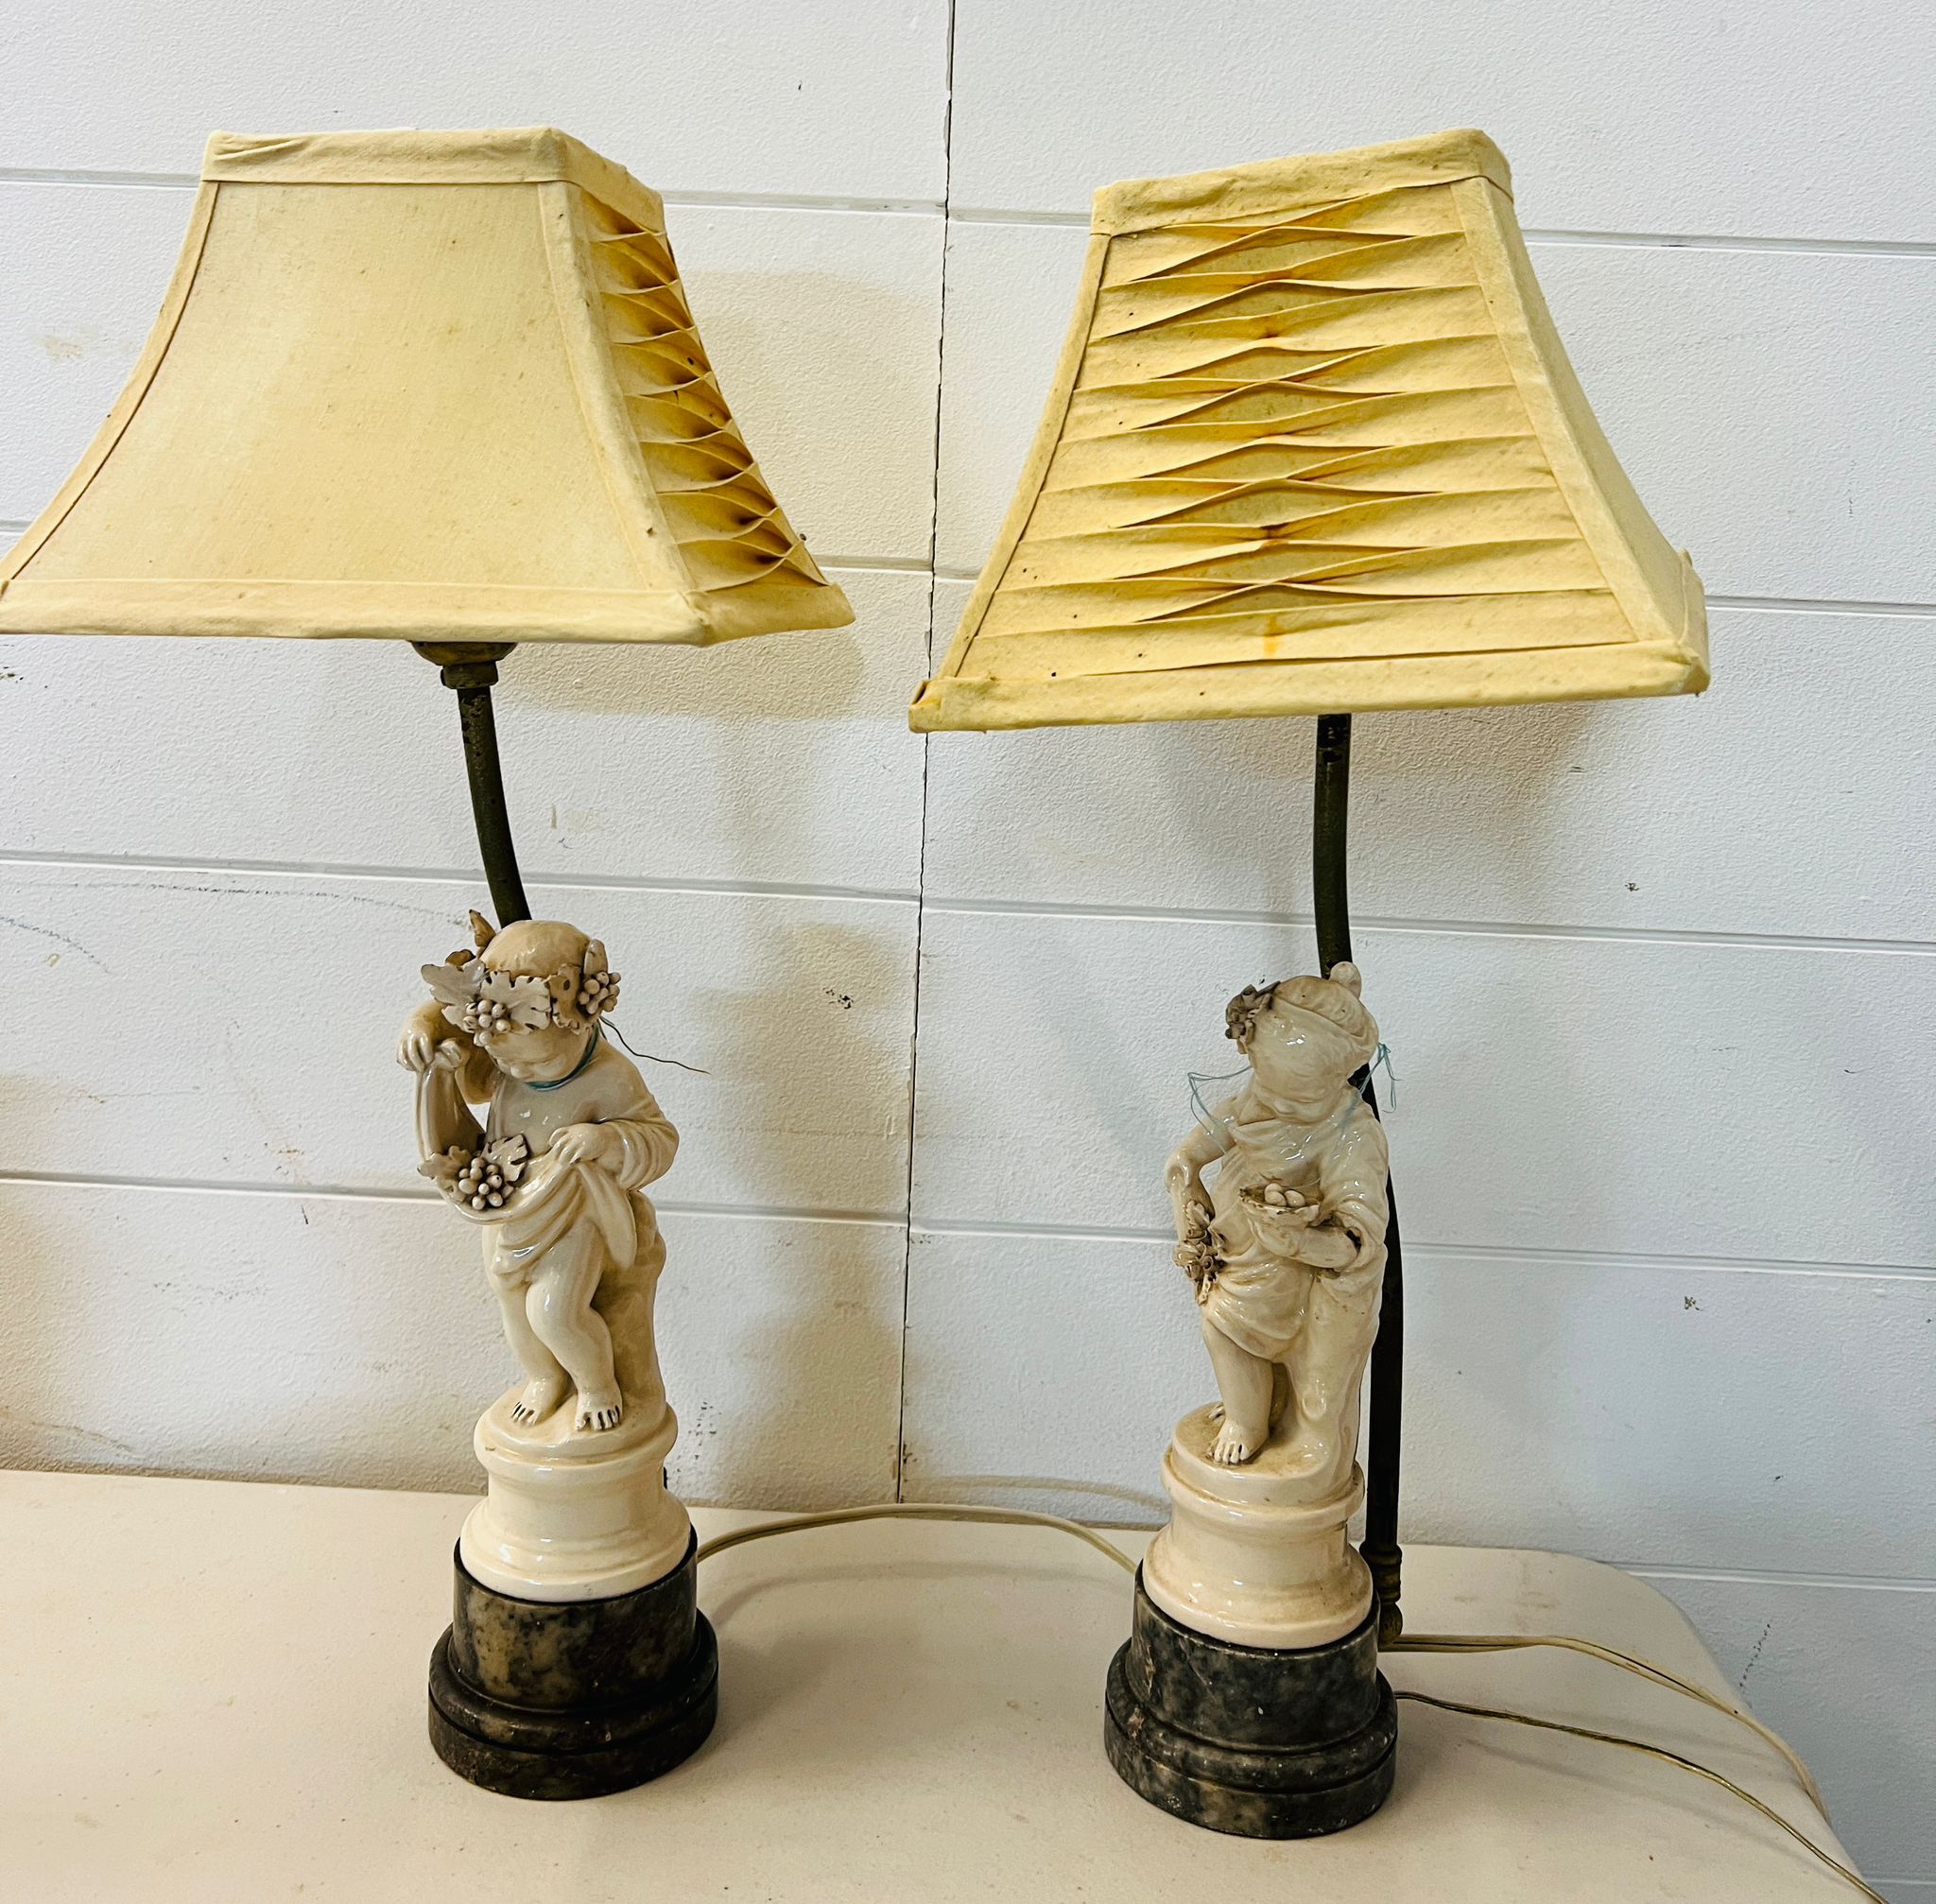 Two porcelain figural lamps on marble base (H50cm)